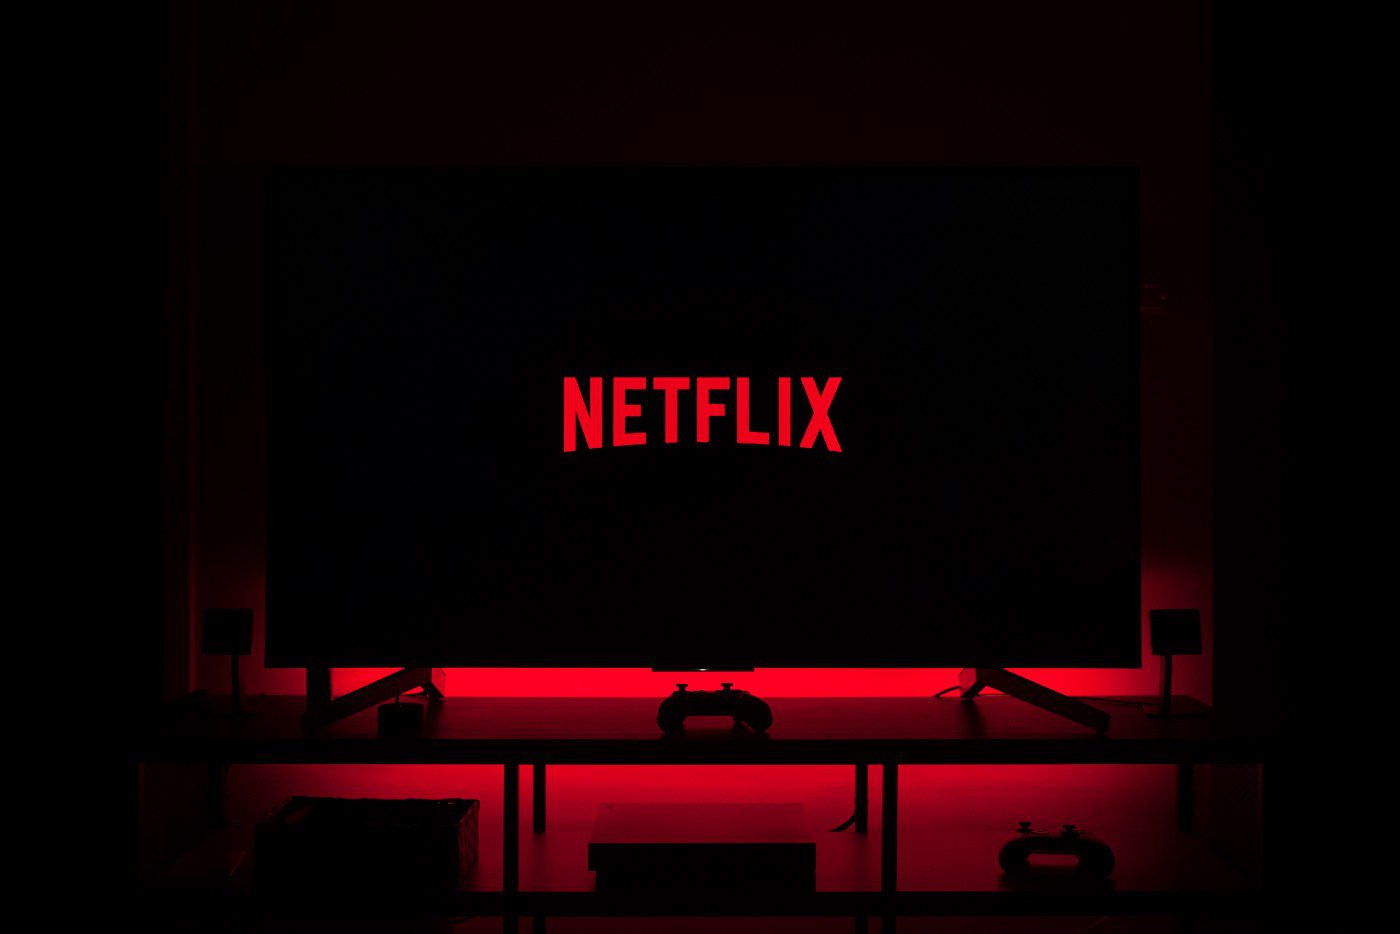 Netflix Scholarship Applications For West & Central Africa Open